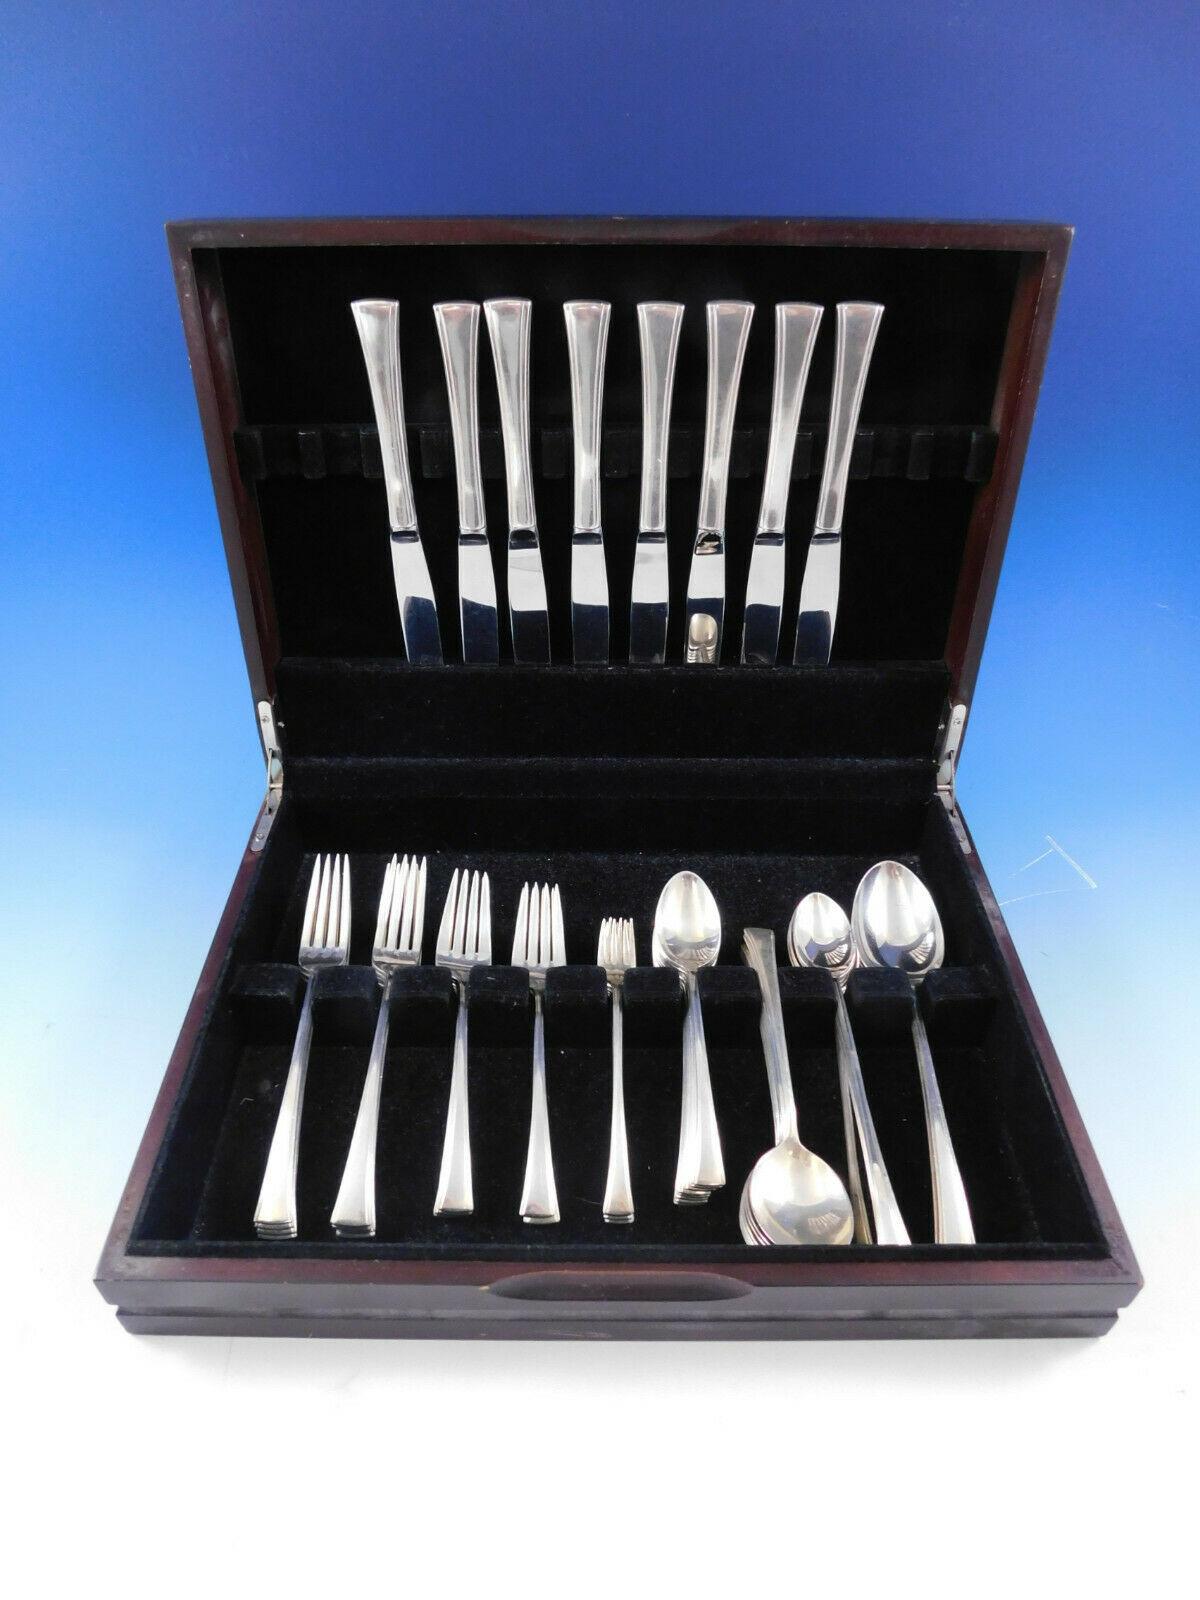 Tranquility by International/Fine Arts sterling silver flatware set of 60 pieces. This set includes:

8 knives, 9 1/8